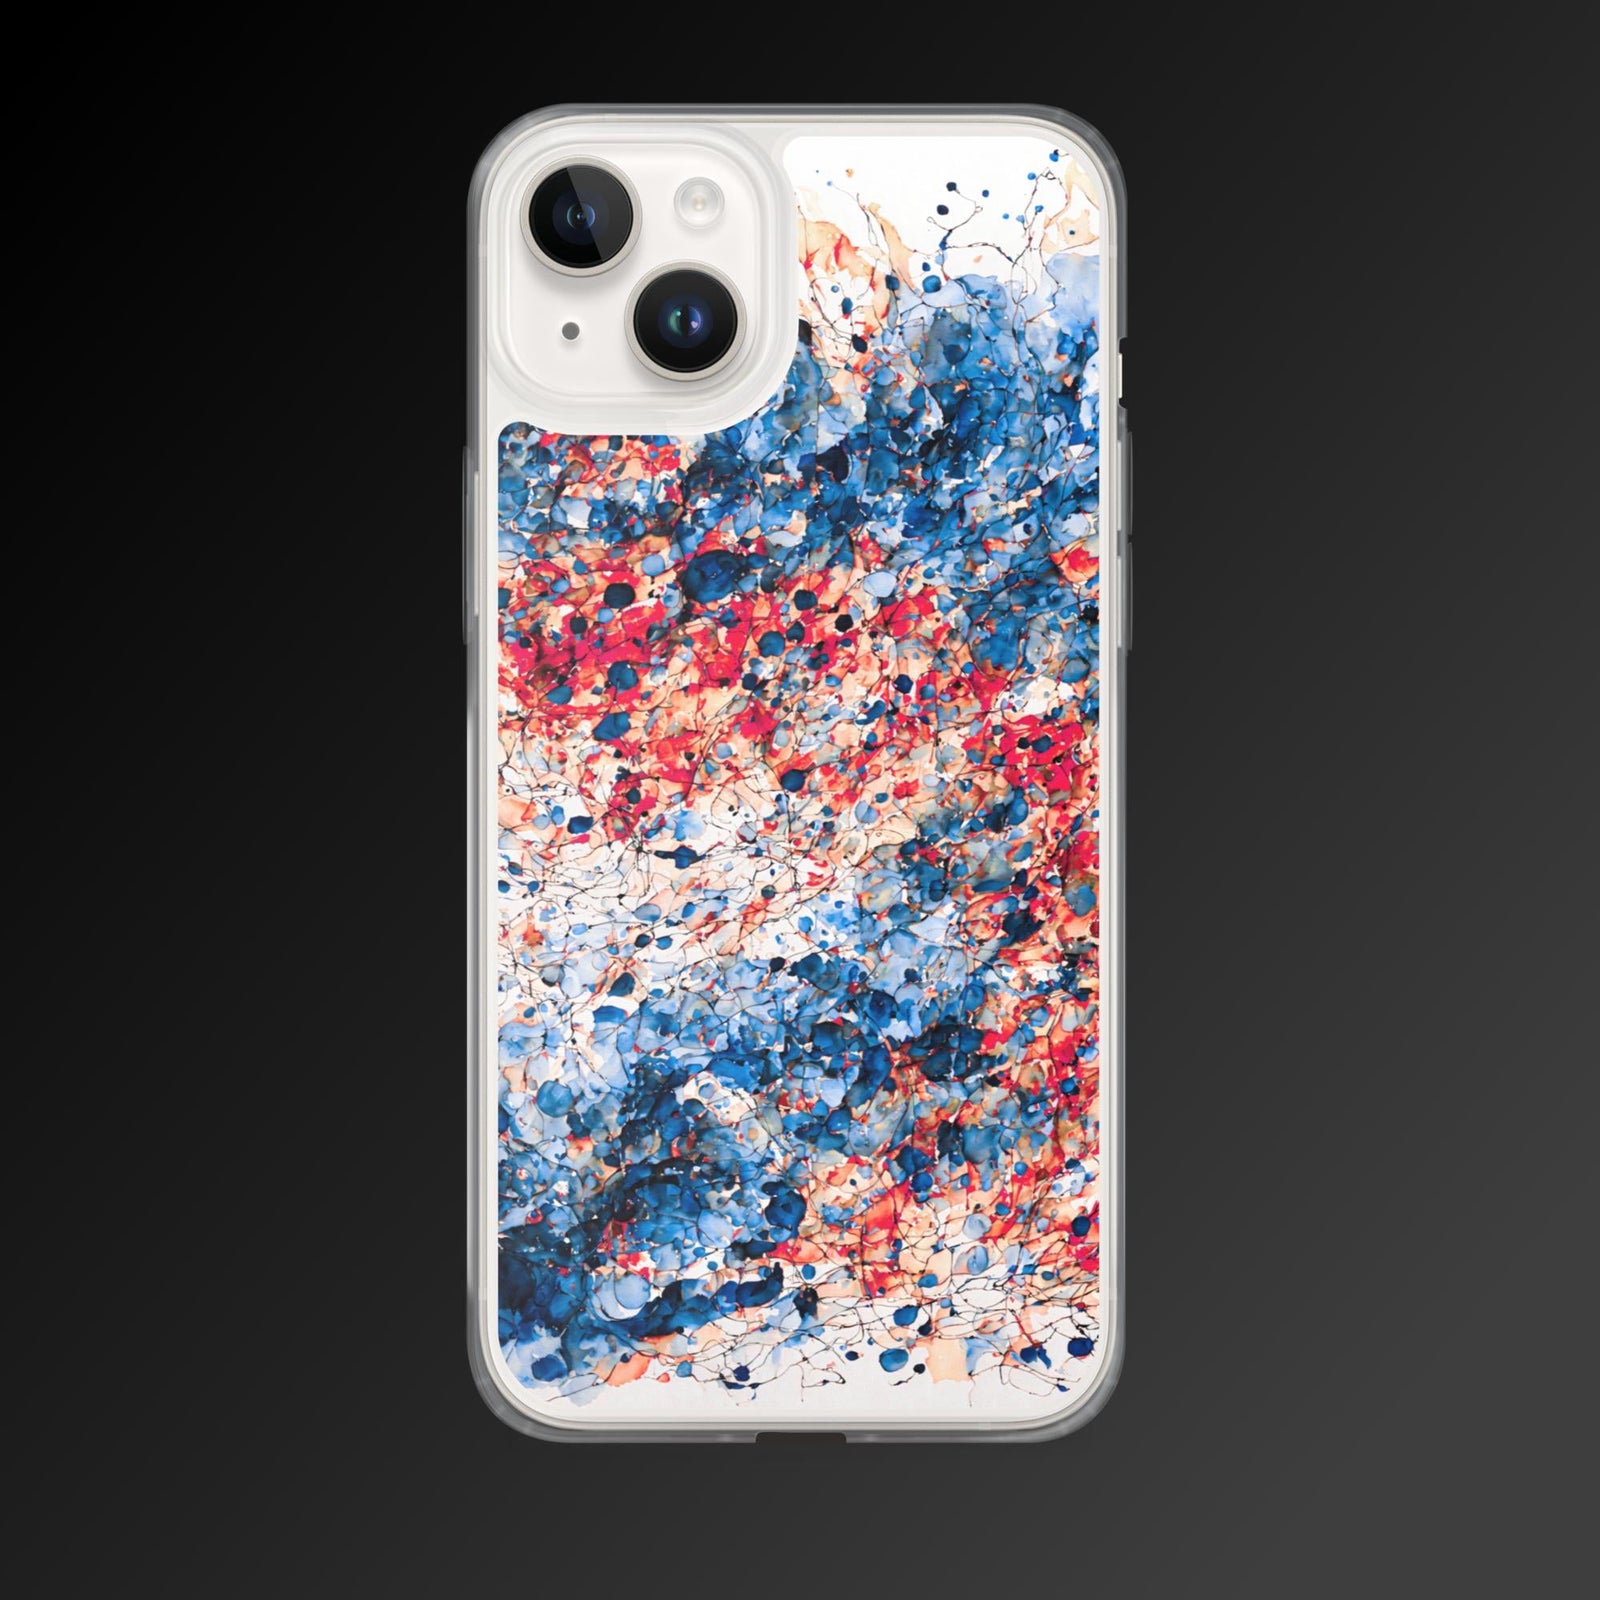 "Dual spirit" clear iphone case - Clear iphone case - Ever colorful